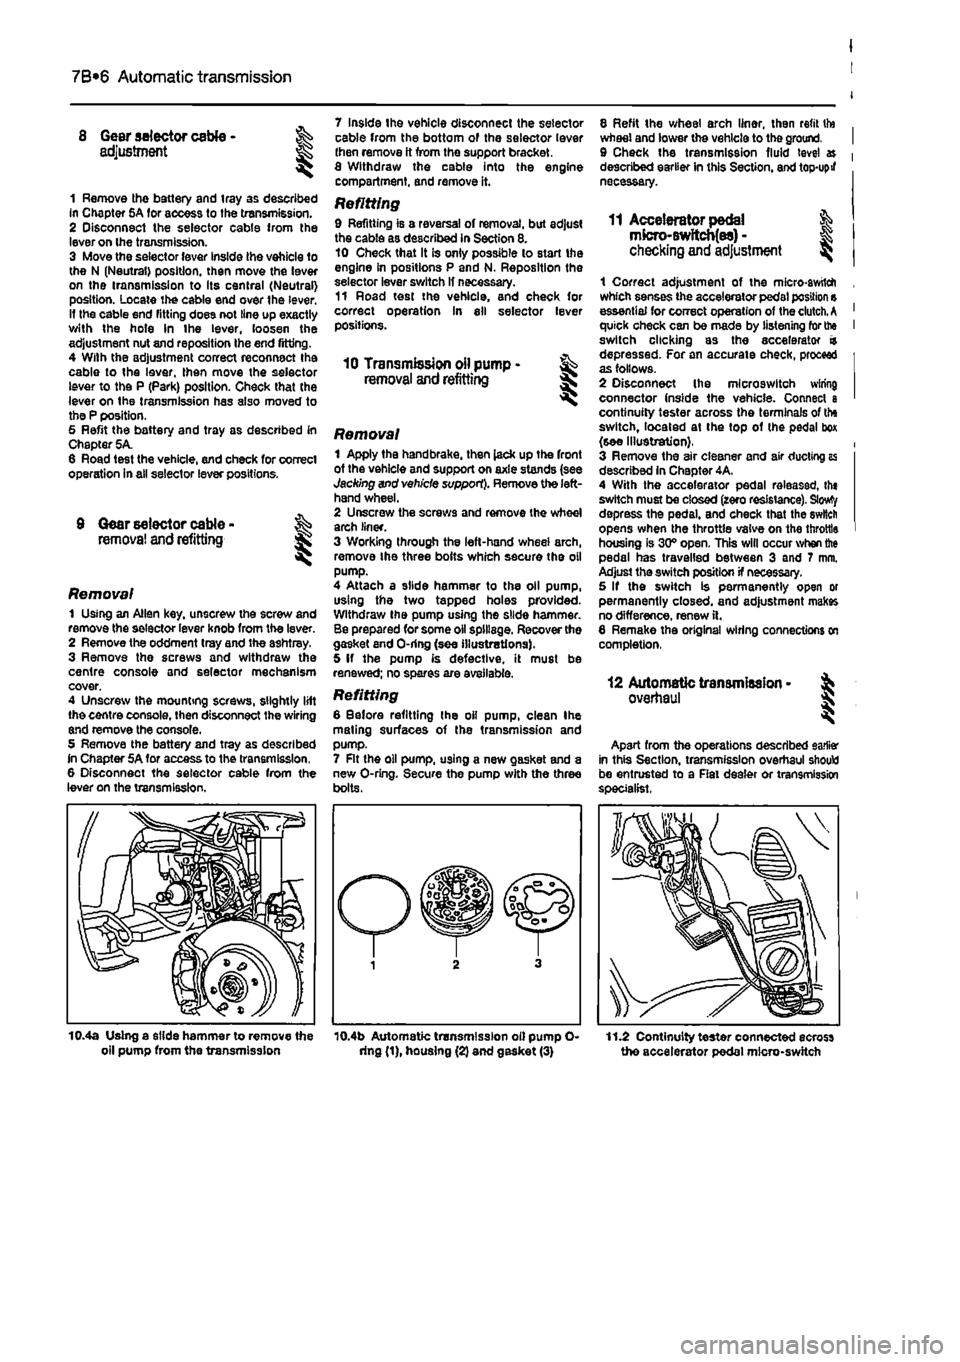 FIAT PUNTO 1995 176 / 1.G User Guide 
7B*6 Automatic transmission 
Gear selector cable -adjustment 
1 Remove the battery and tray as described In Chapter 5A for access to the transmission. 2 Disconnect the selector cable from the lever o